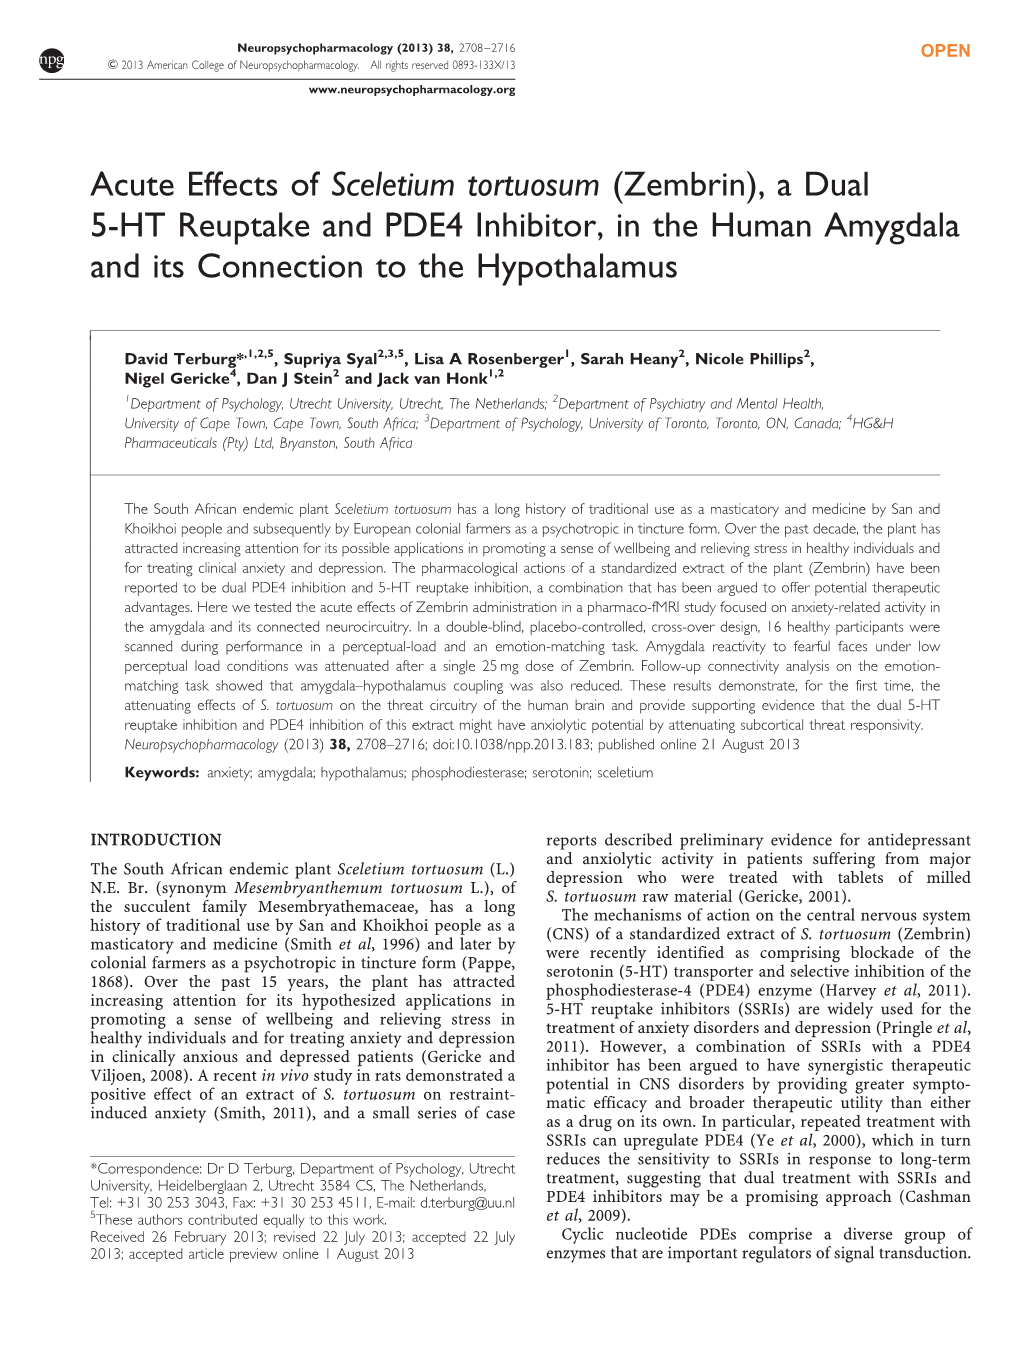 Zembrin), a Dual 5-HT Reuptake and PDE4 Inhibitor, in the Human Amygdala and Its Connection to the Hypothalamus